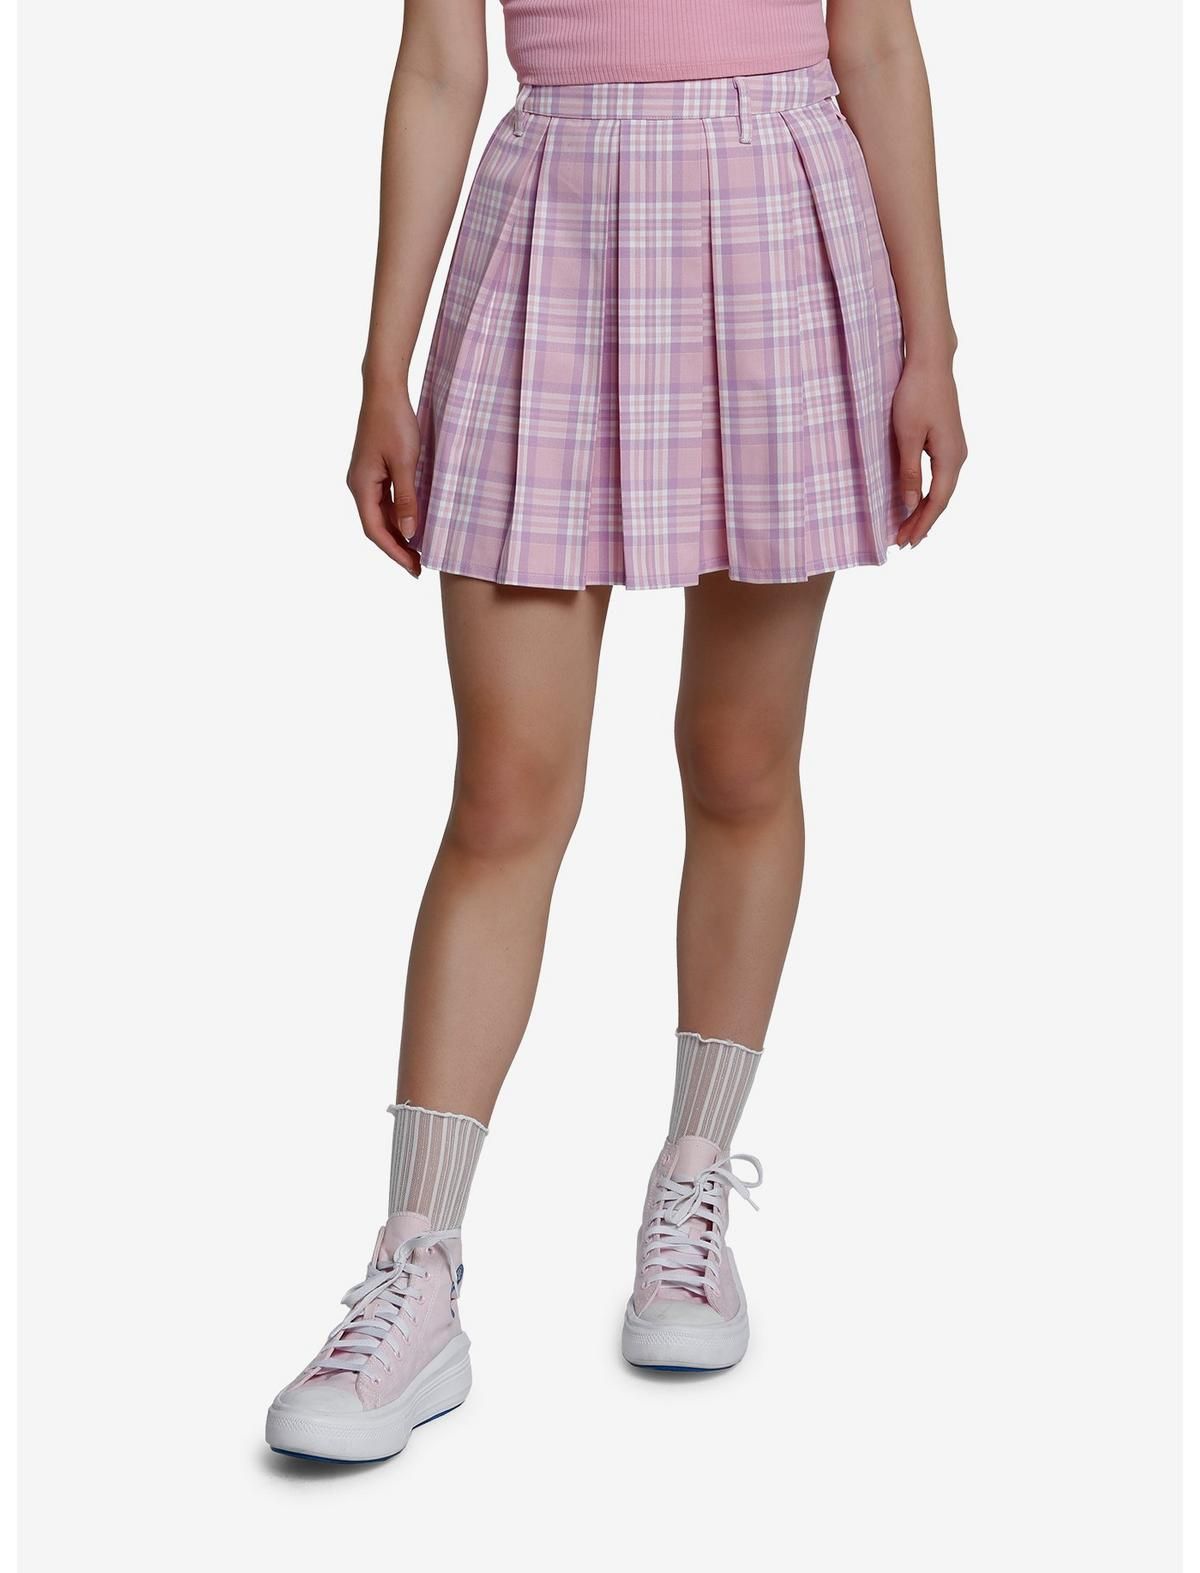 Sweet Society Pink & Lavender Plaid Pleated Skirt | Hot Topic | Hot Topic